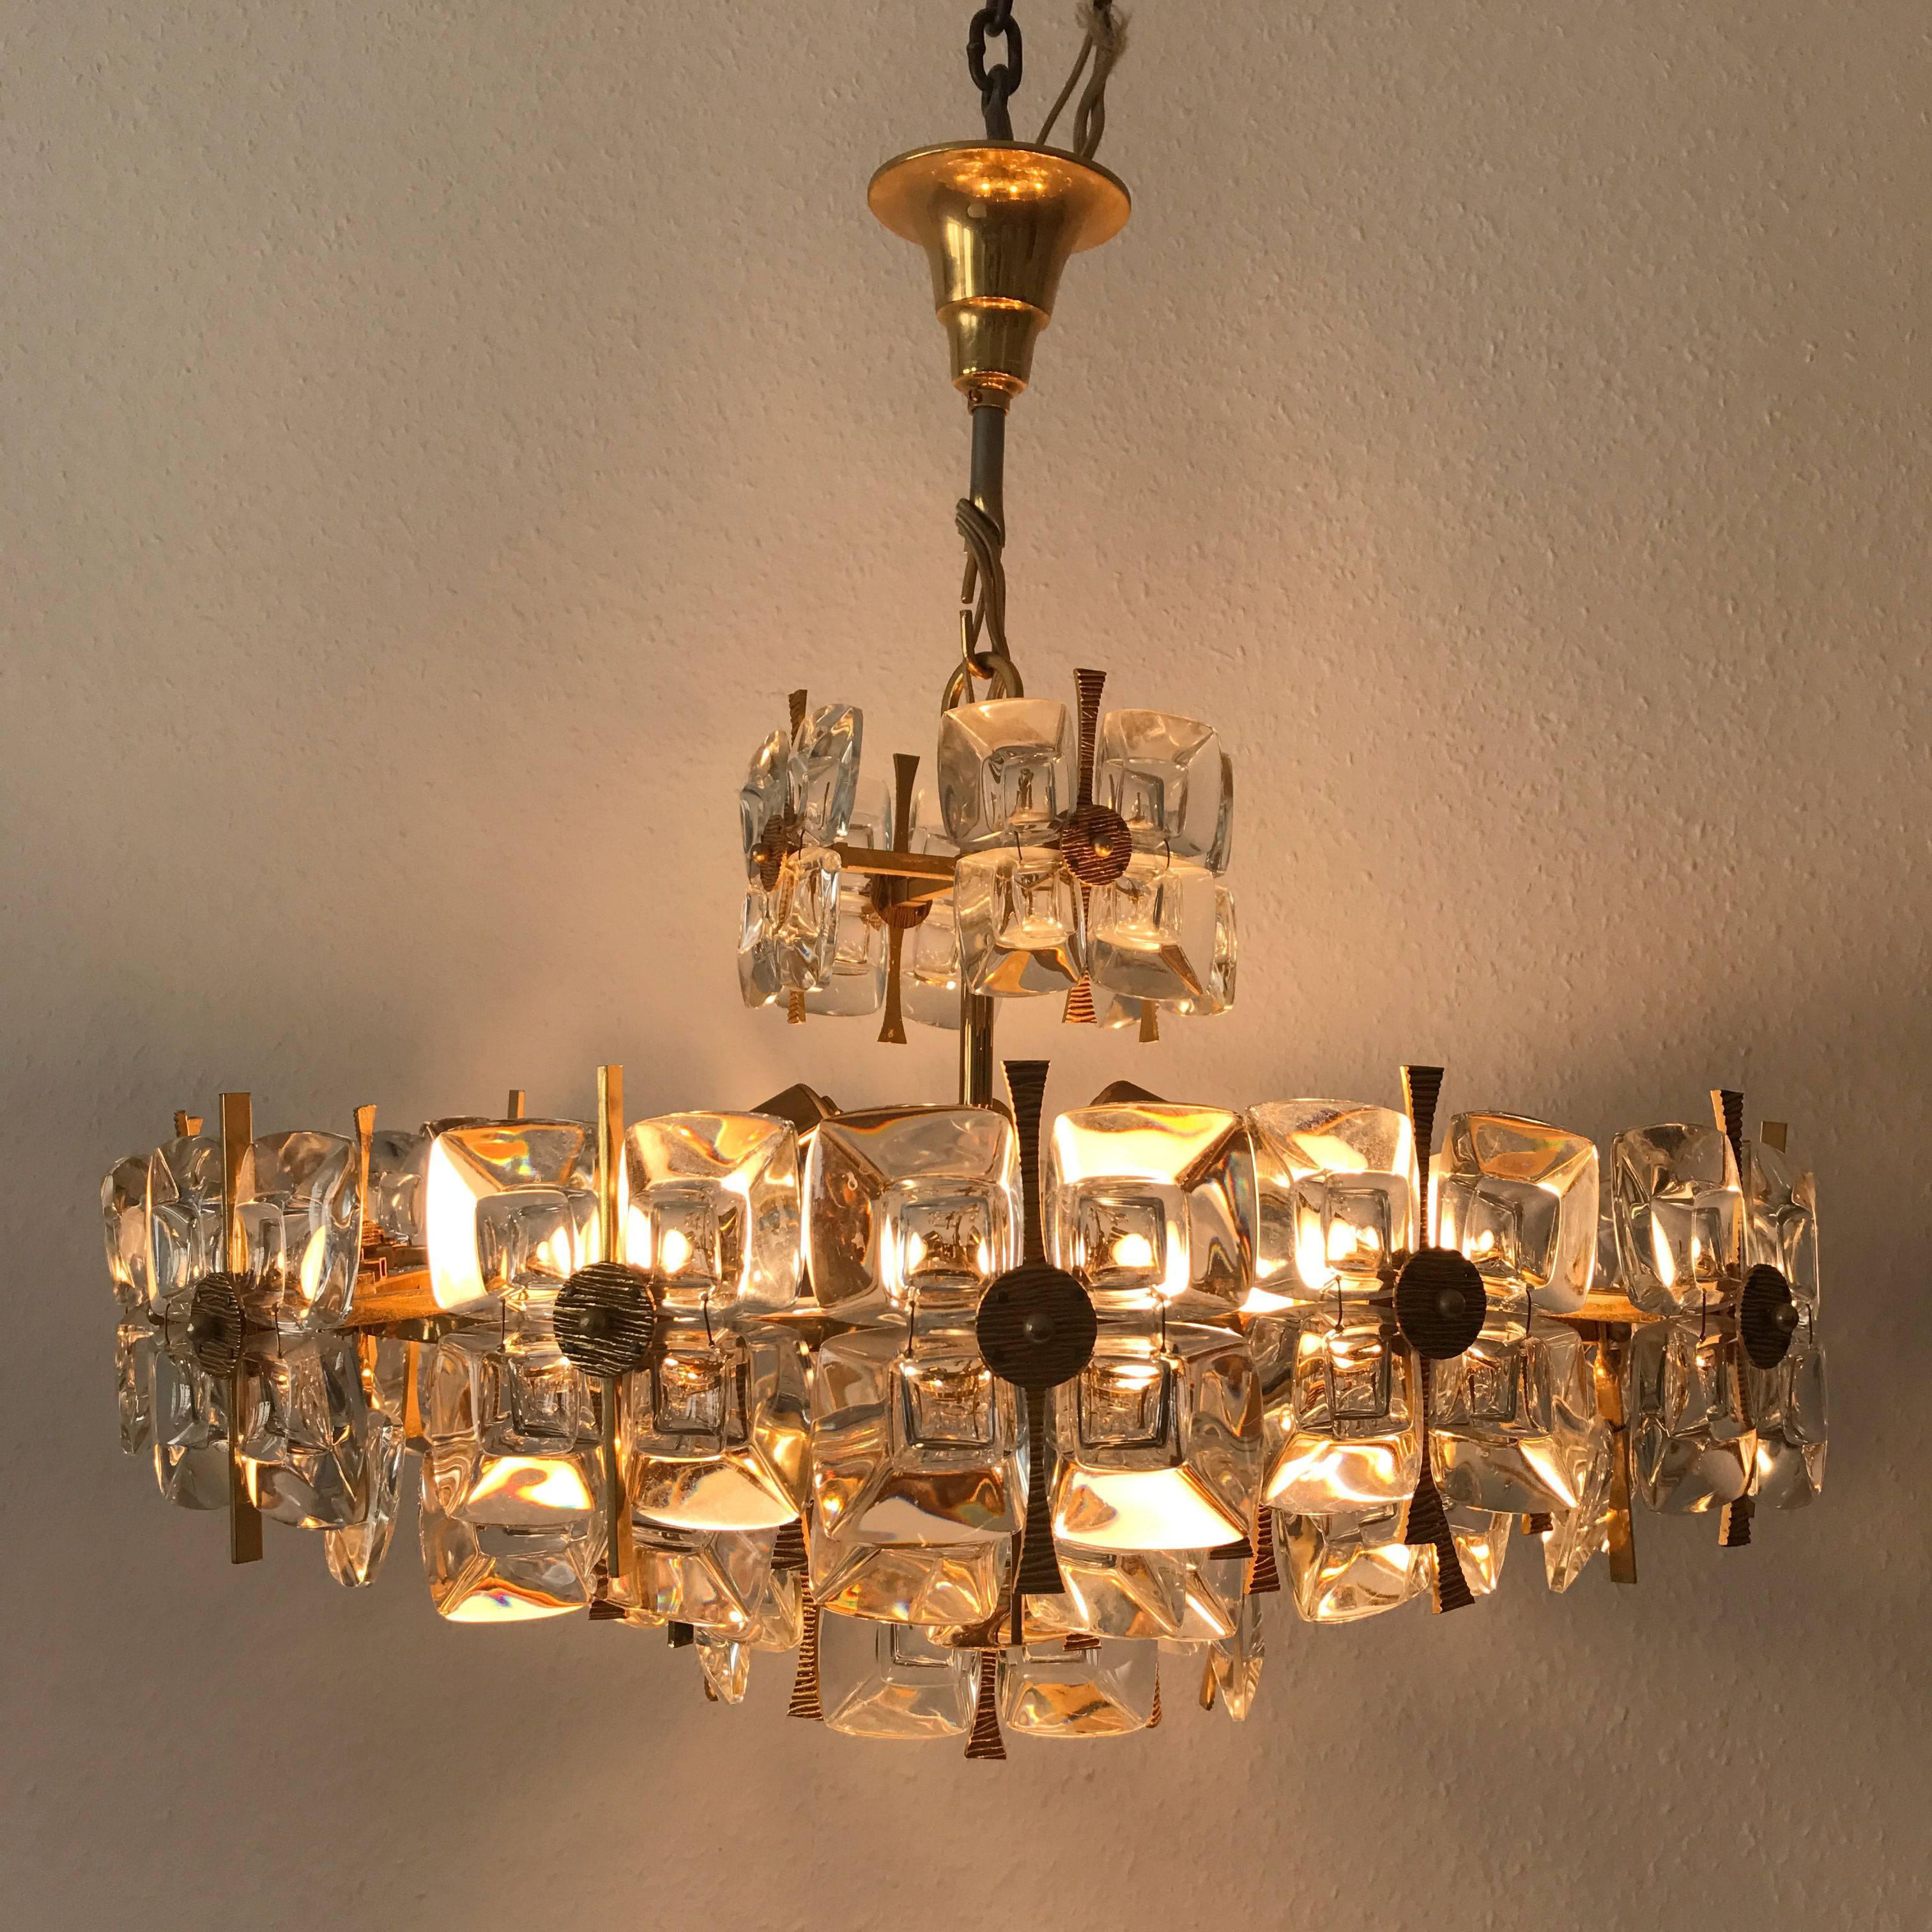 Exceptional, extremely rare and large Mid-Century Modern chandelier or pendant lamp, executed in gilt brass and large glass elements. Manufactured by Palwa, Germany in 1970s.
The chandelier needs nine Edison screw fit bulbs (Six E27 and three E14).